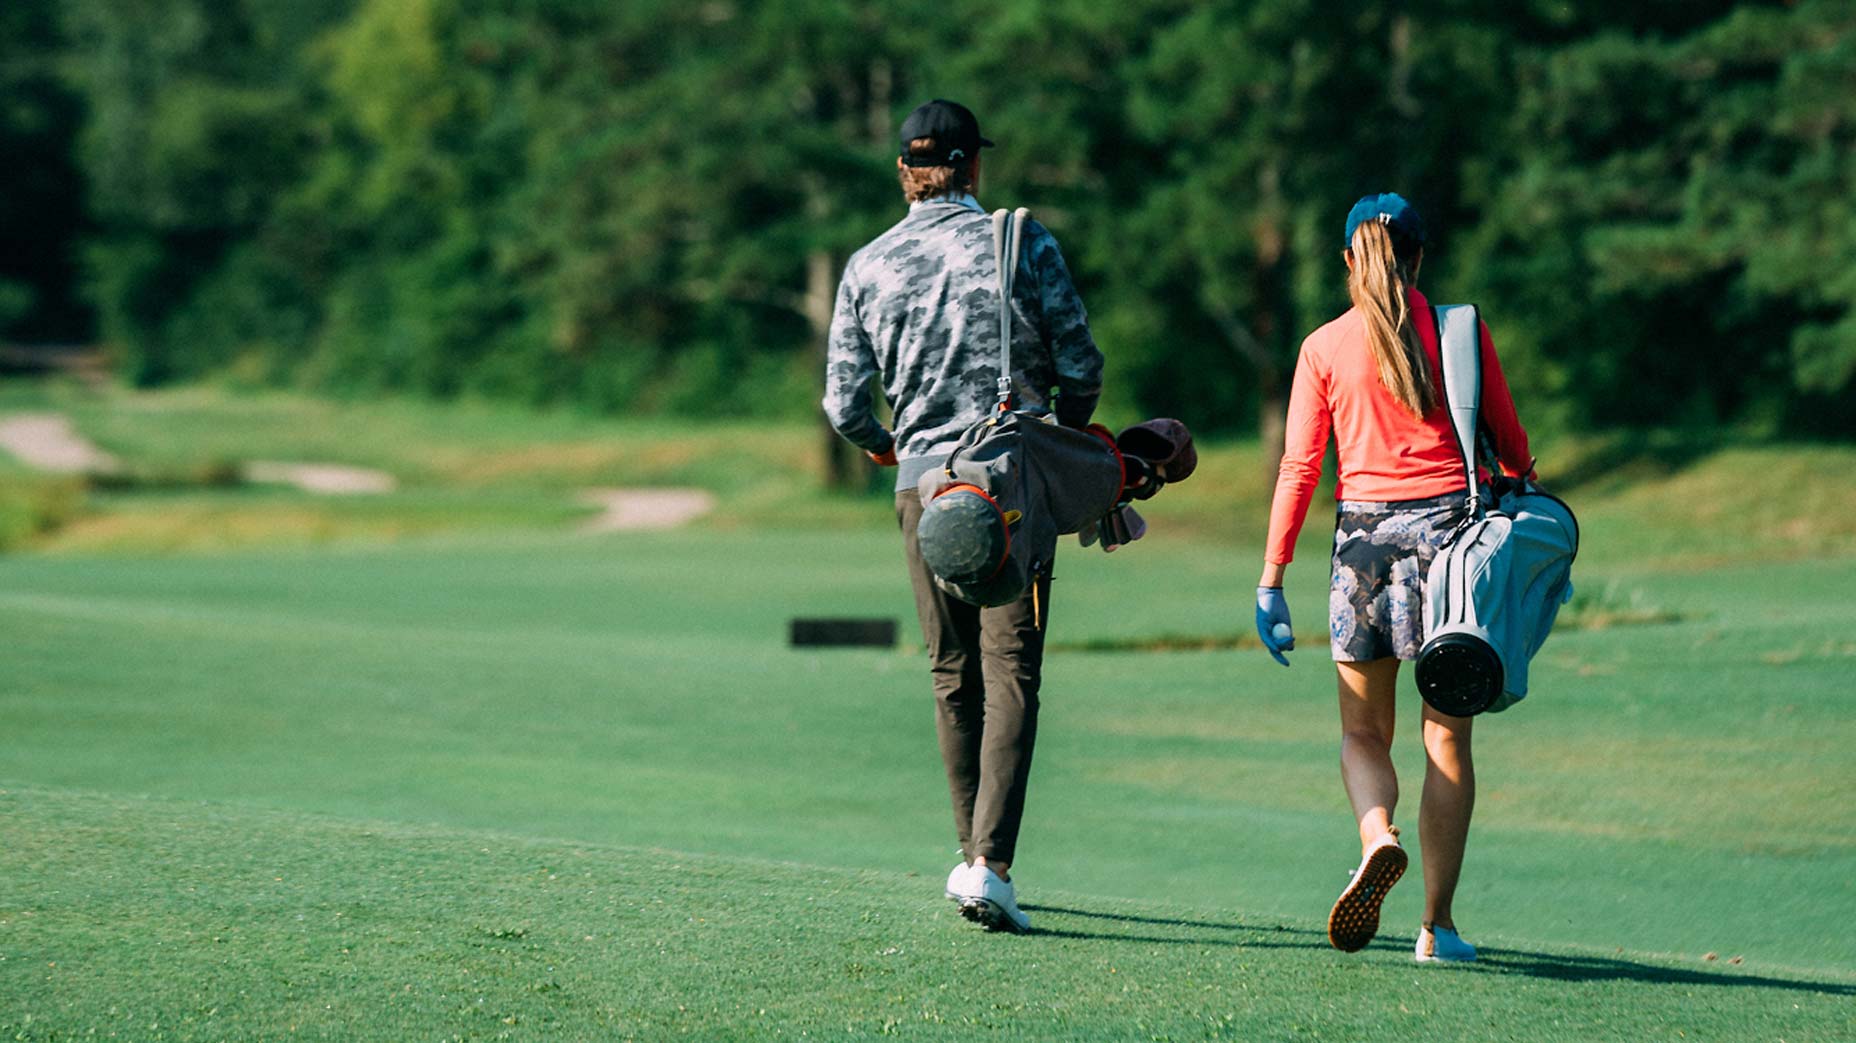 The Best Golf Bags | The Ultimate Guide to Golf Bags